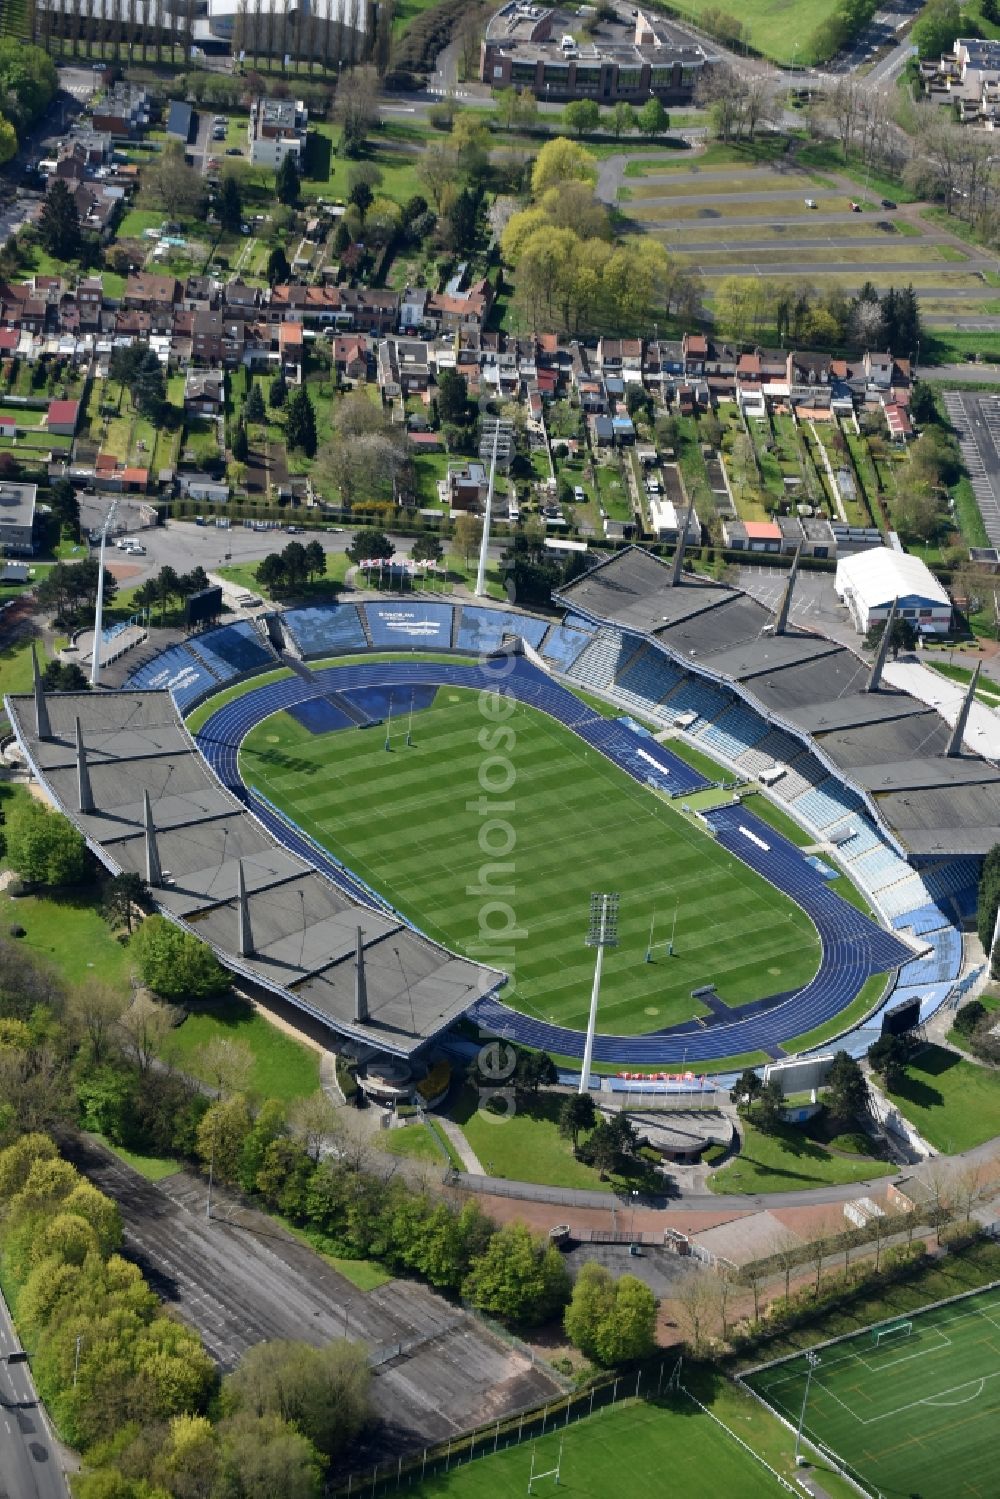 Aerial photograph Lille - Sports facility grounds of the Arena stadium Stadium Nord Lille Metropole on Avenue de la Chatellenie in Lille in Nord-Pas-de-Calais Picardy, France